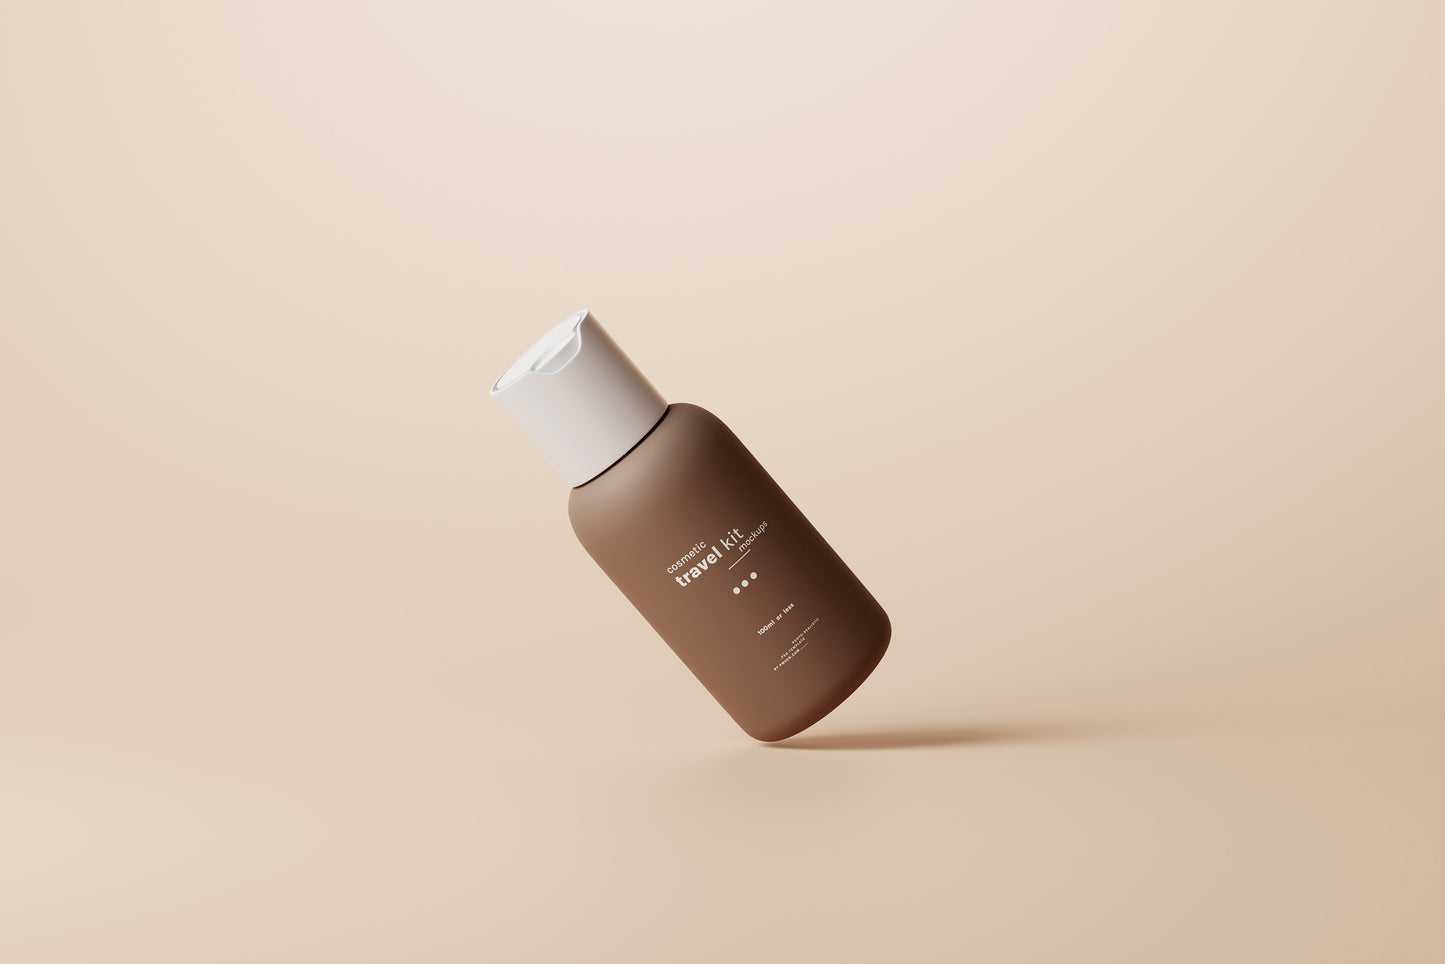 Travel-Size Small Disc Top Cap Cosmetic Bottle Mockups